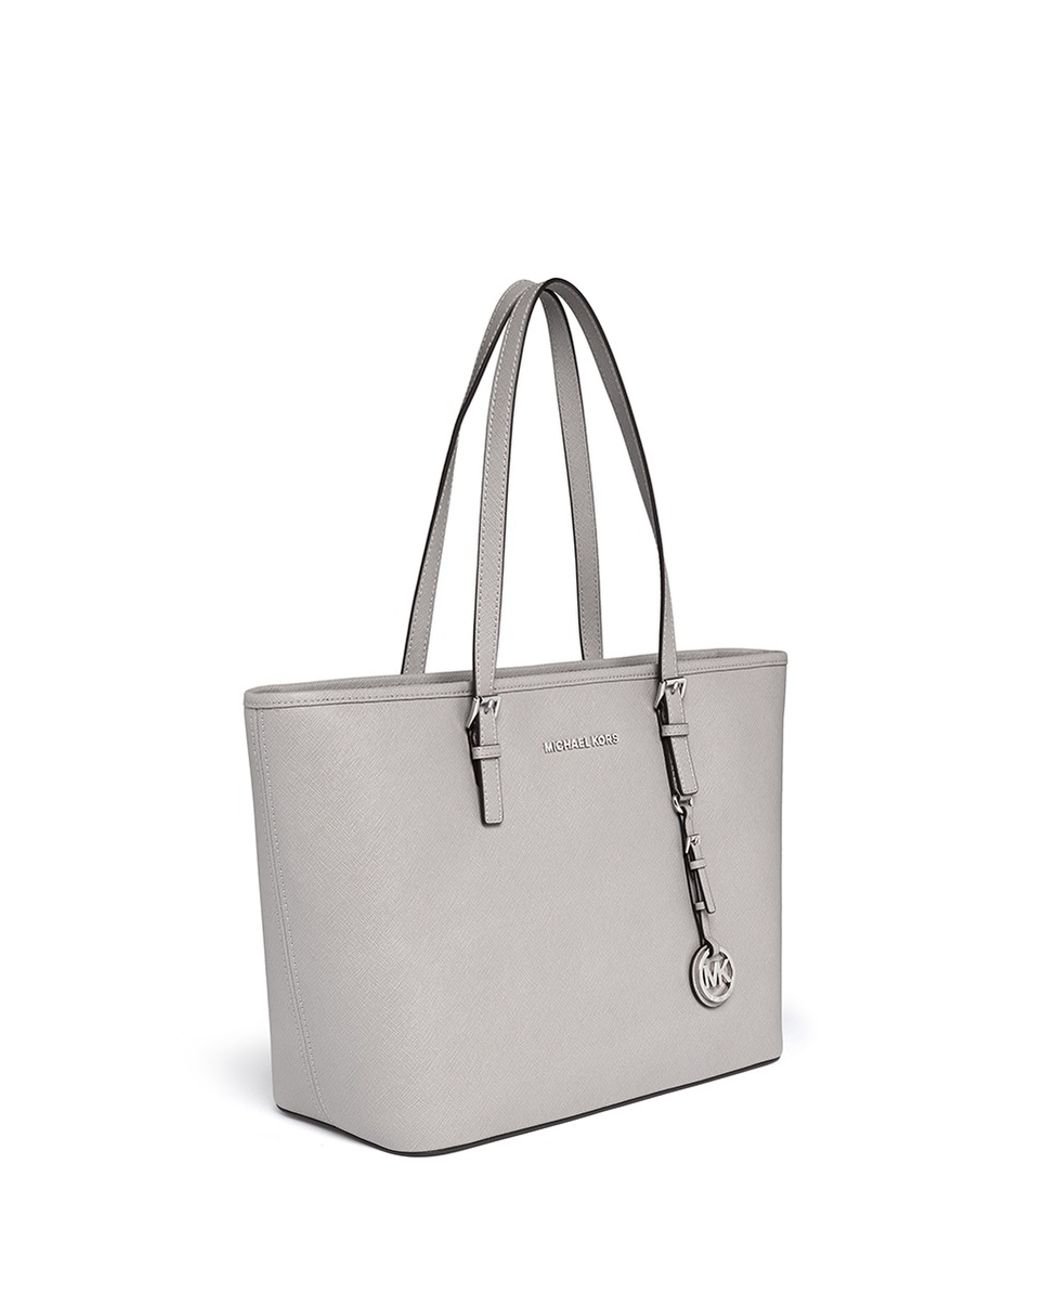 MICHAEL KORS Grey Jet Set Large Saffiano Leather Bag #41130 – ALL YOUR BLISS